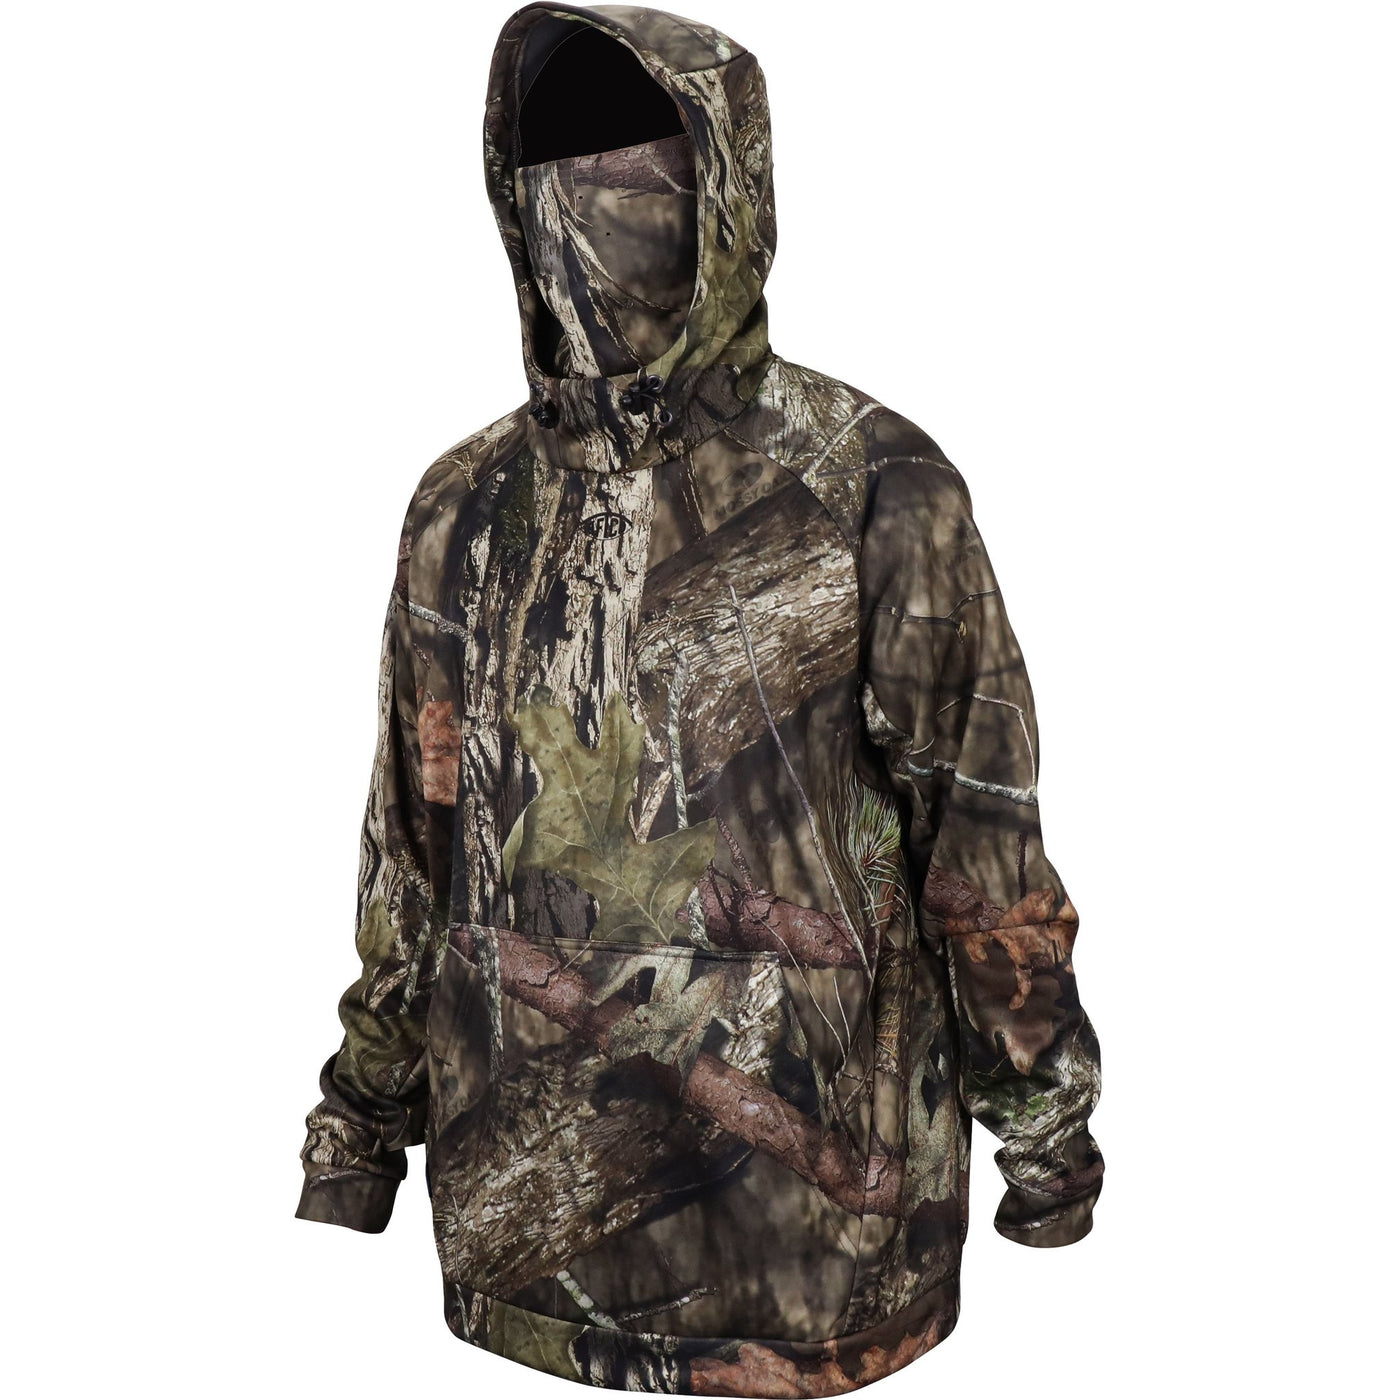 AFTCO Reaper Technical Fleece Hoodie-MENS CLOTHING-Mossy Oak Break Up Country-S-Kevin's Fine Outdoor Gear & Apparel